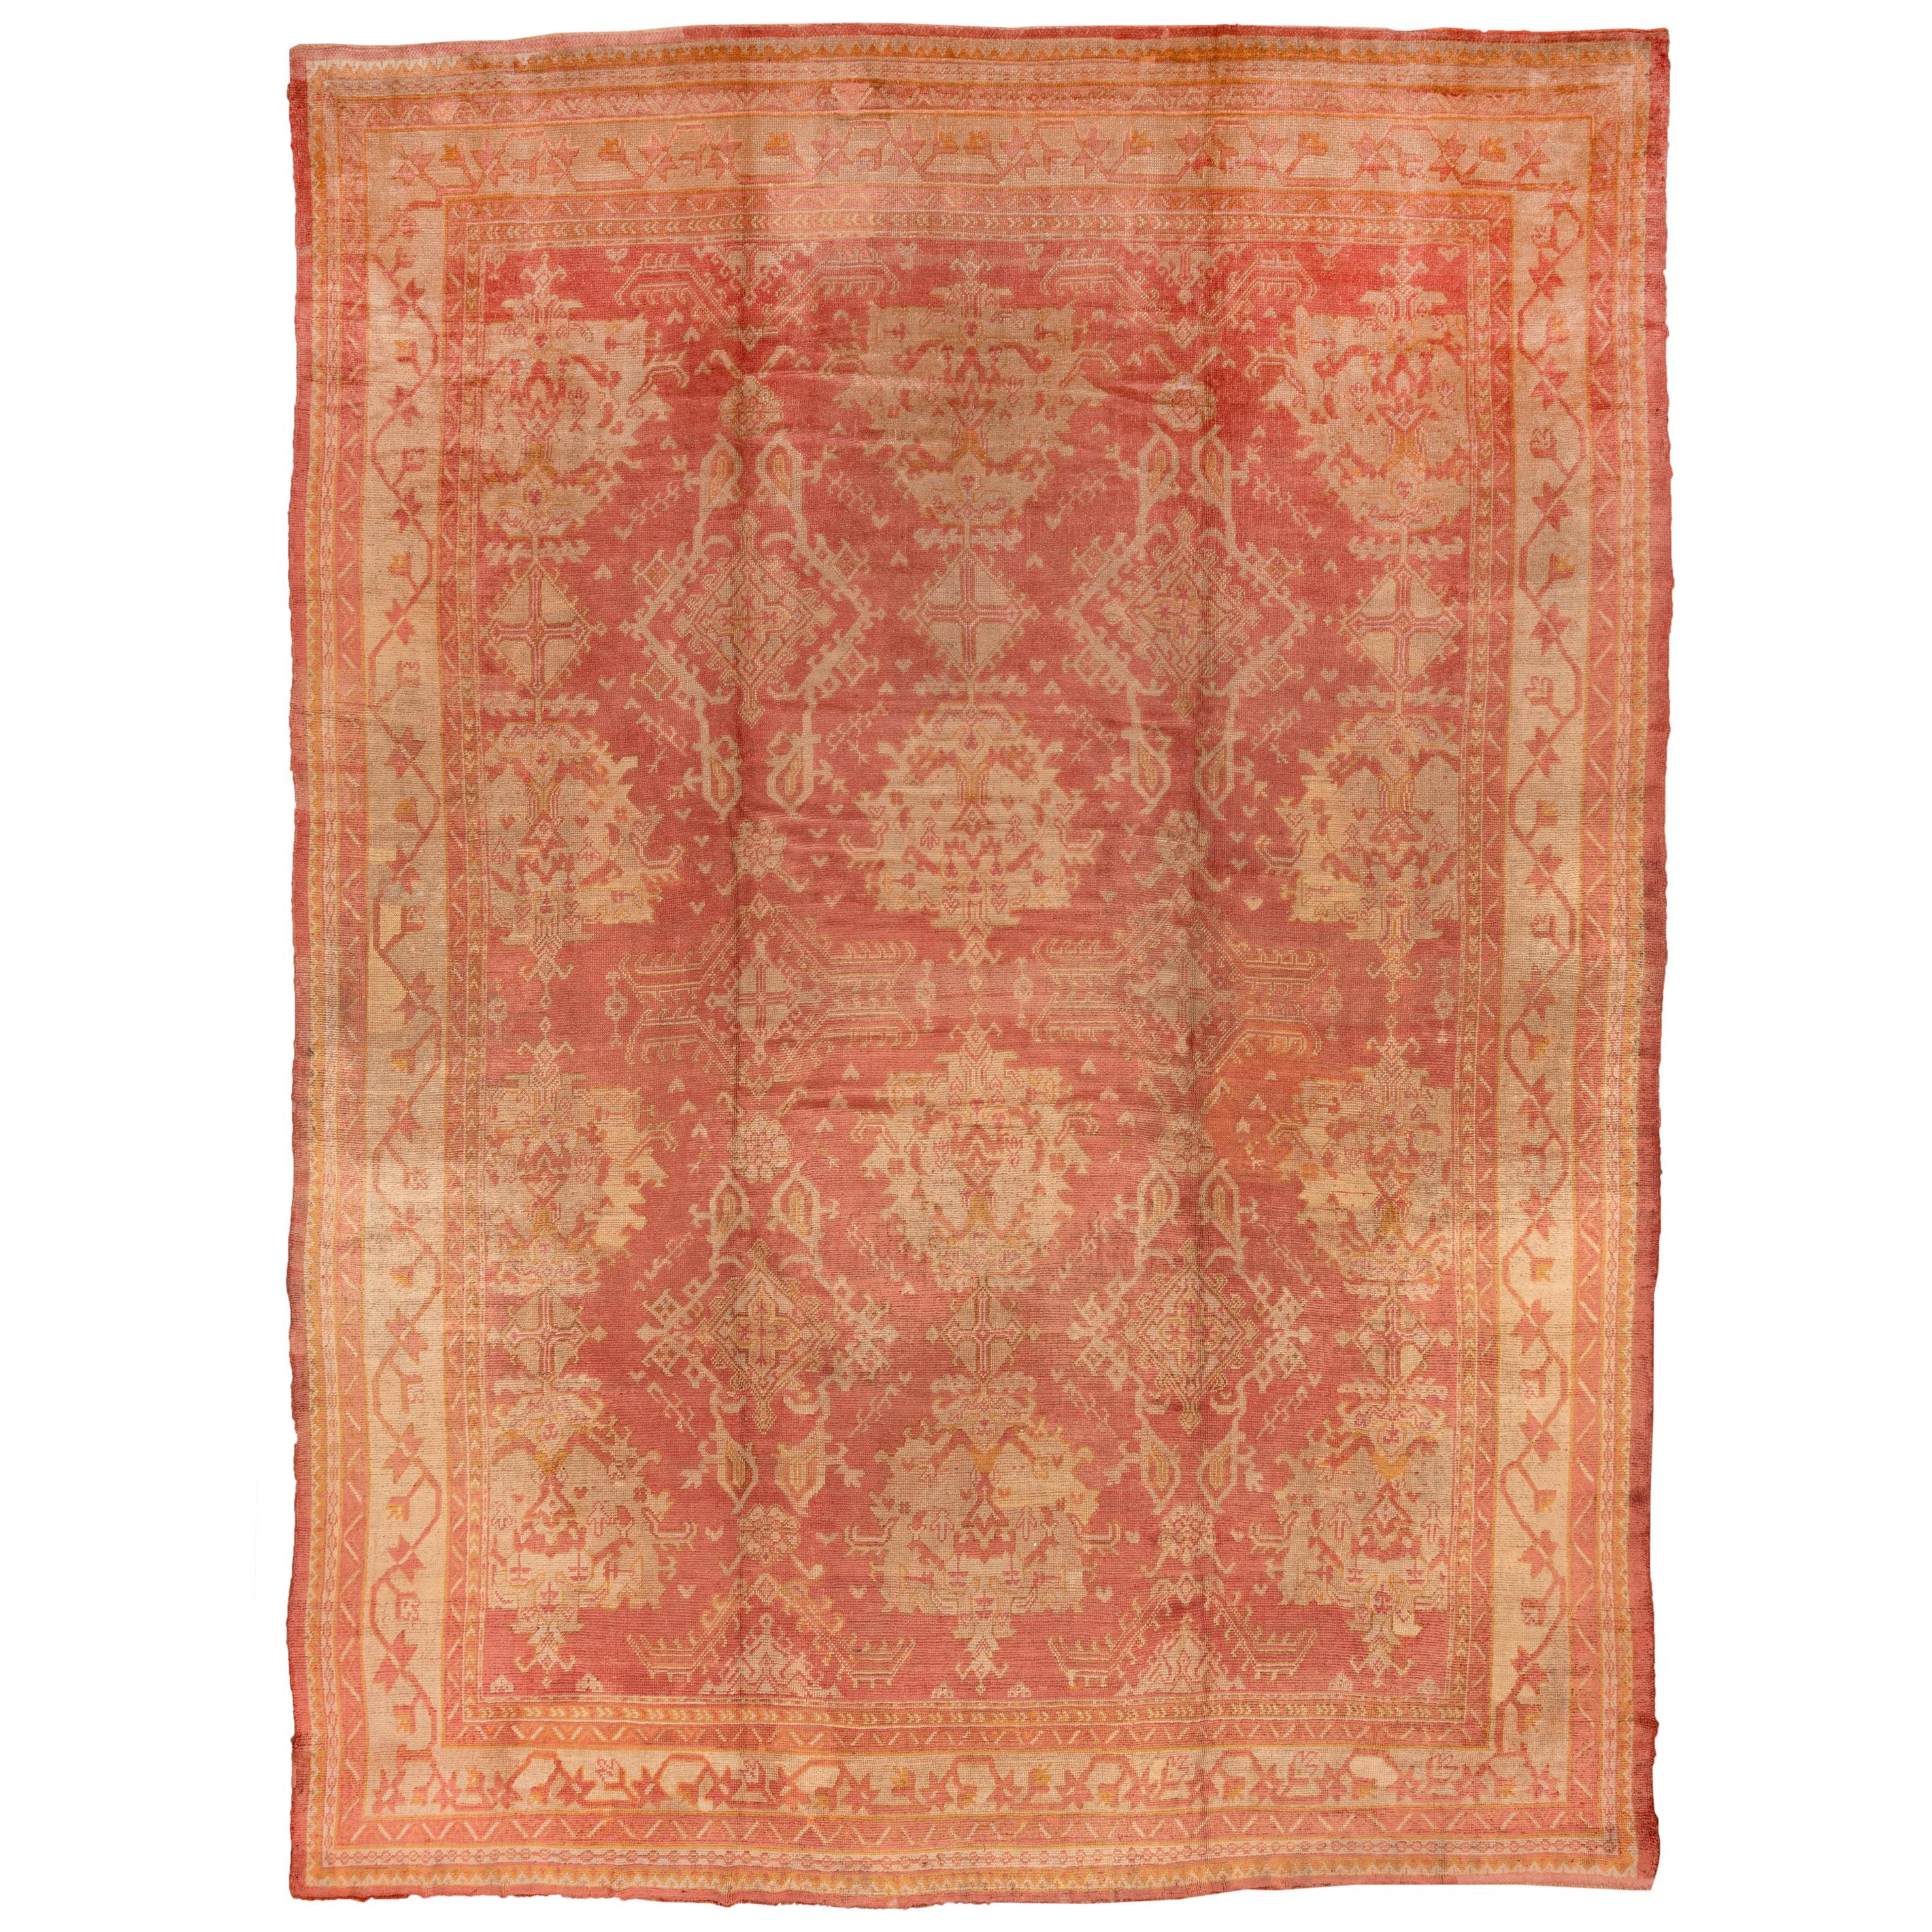 1910s Antique Turkish Oushak Area Rug, Light Red All-Over Field, Gold Borders For Sale